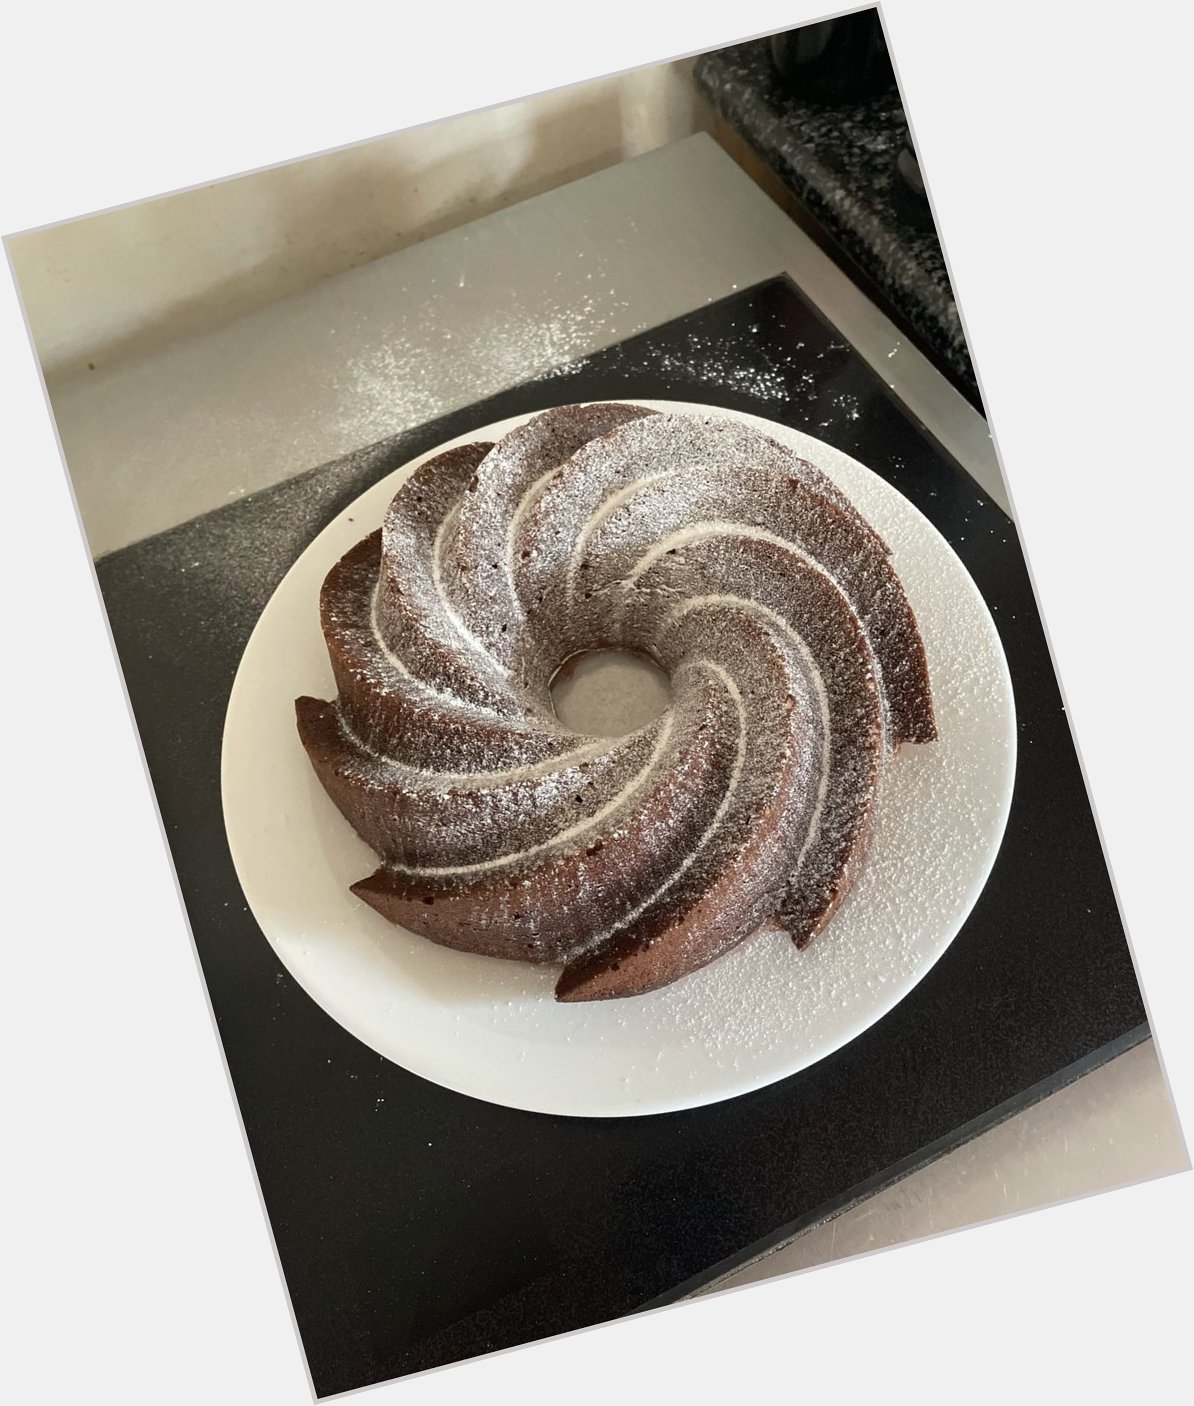  Happy birthday old fruit.  Here s my first ever go at your Bundt cake, to celebrate. 